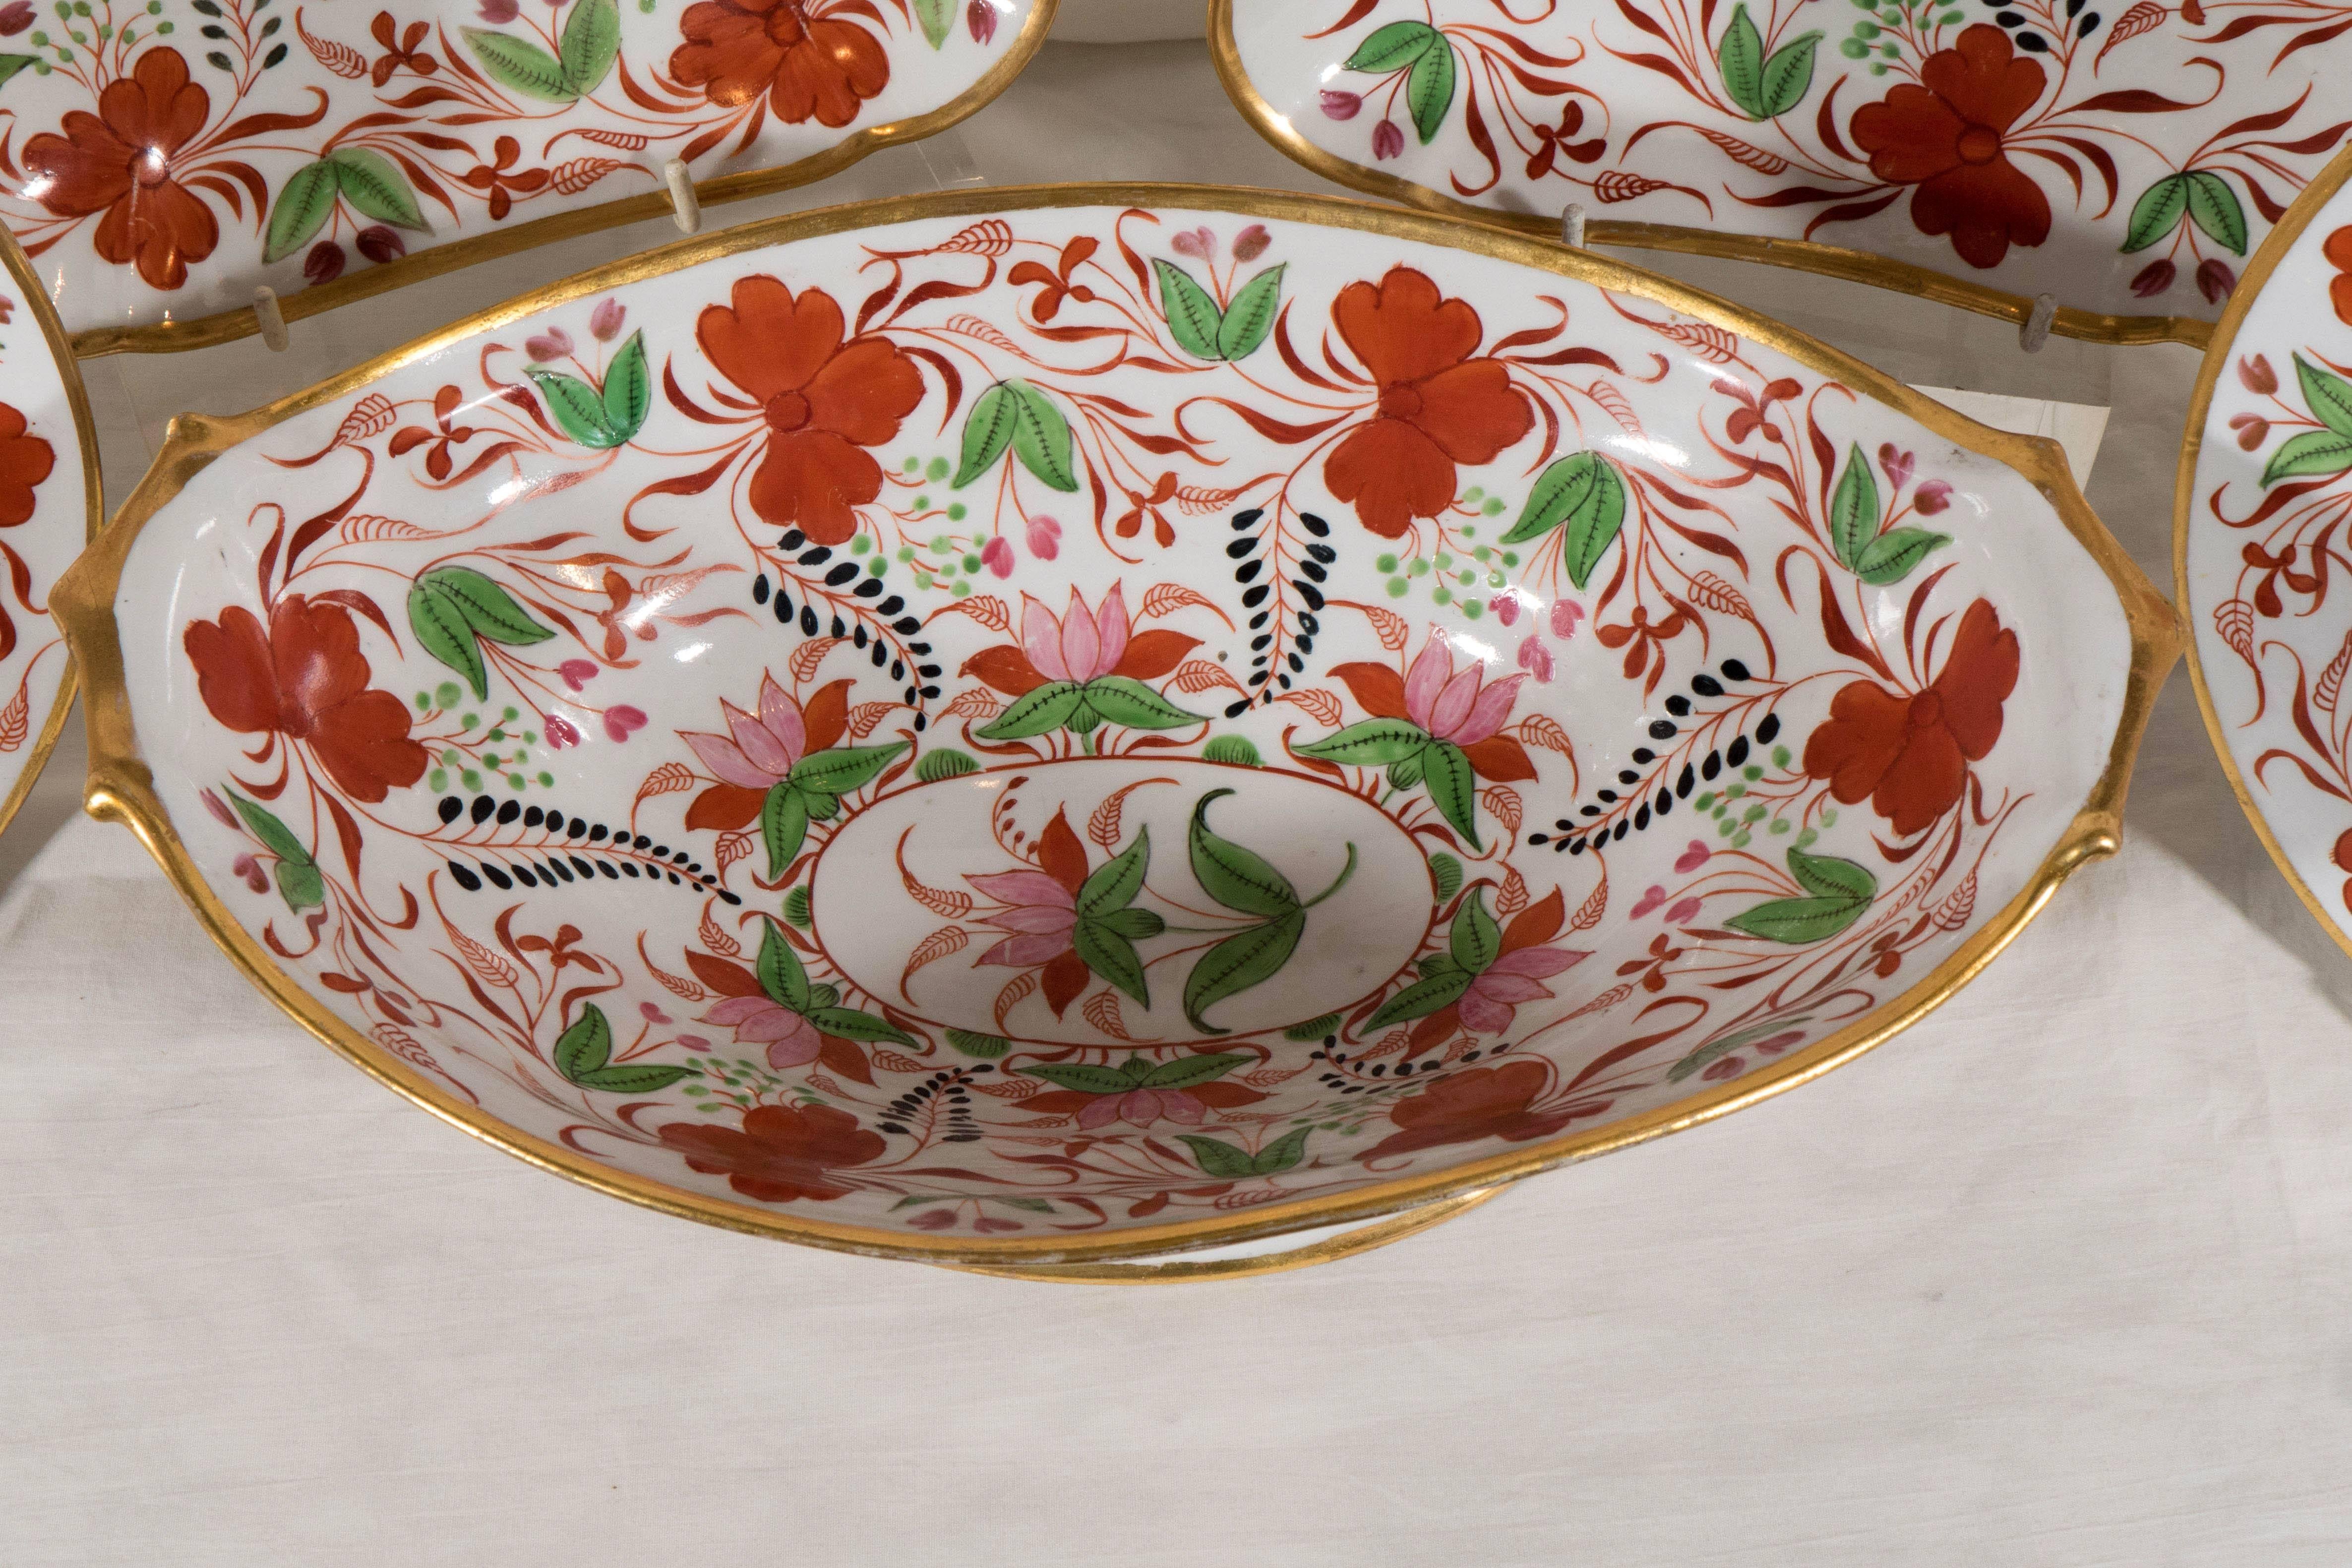 19th Century Outstanding Group of Miles Mason Dishes in an Extraordinary Overall Pattern